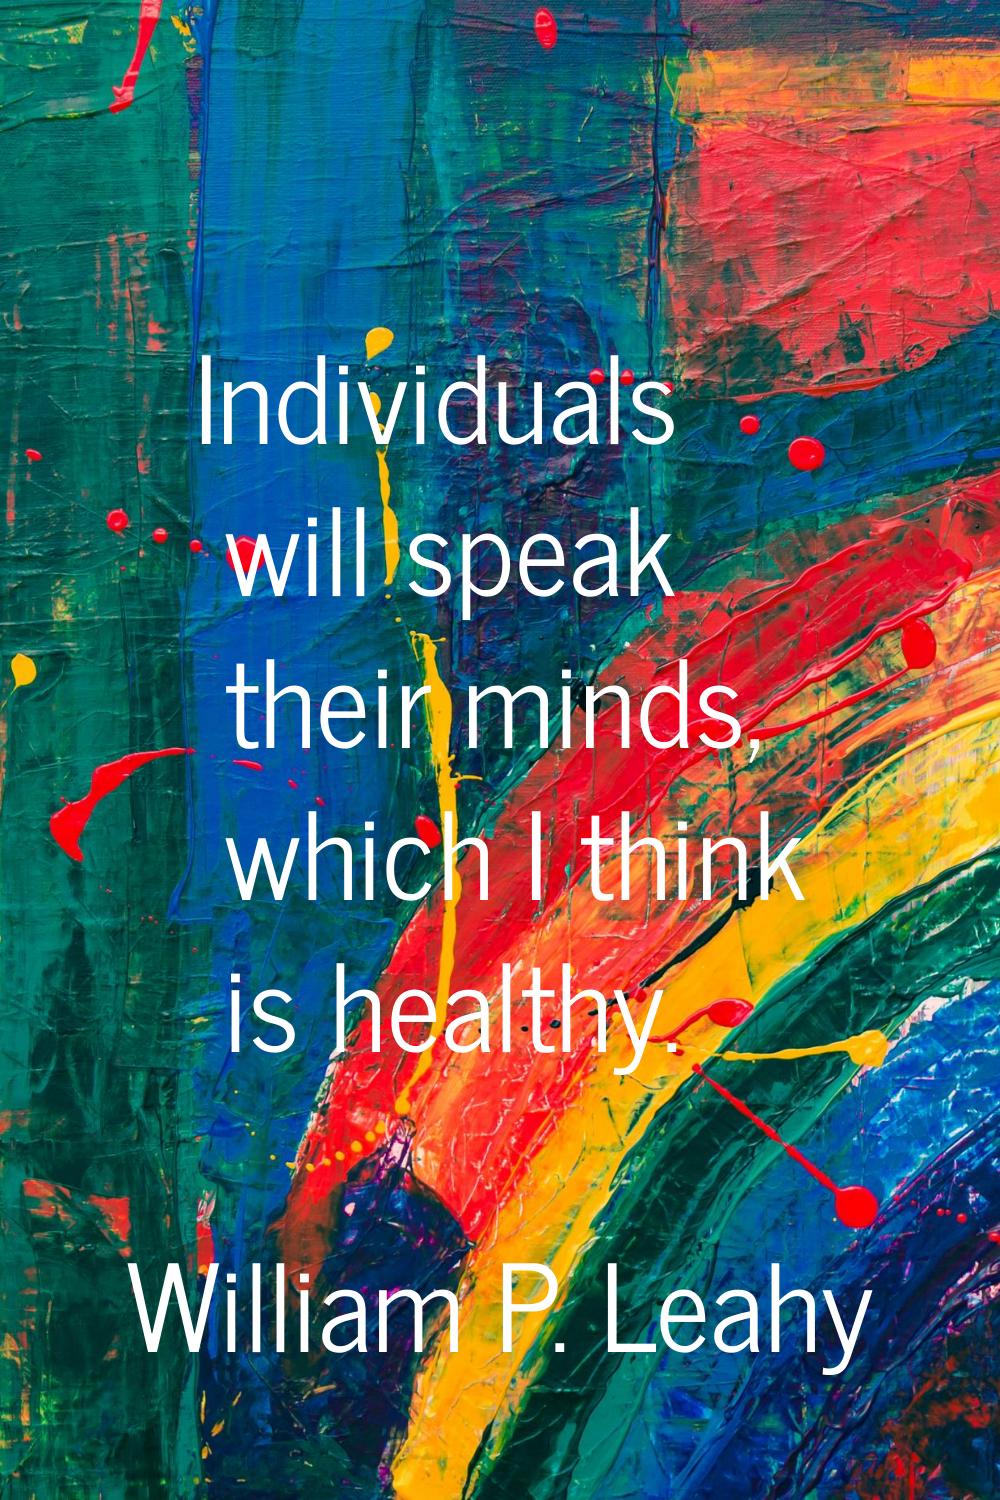 Individuals will speak their minds, which I think is healthy.